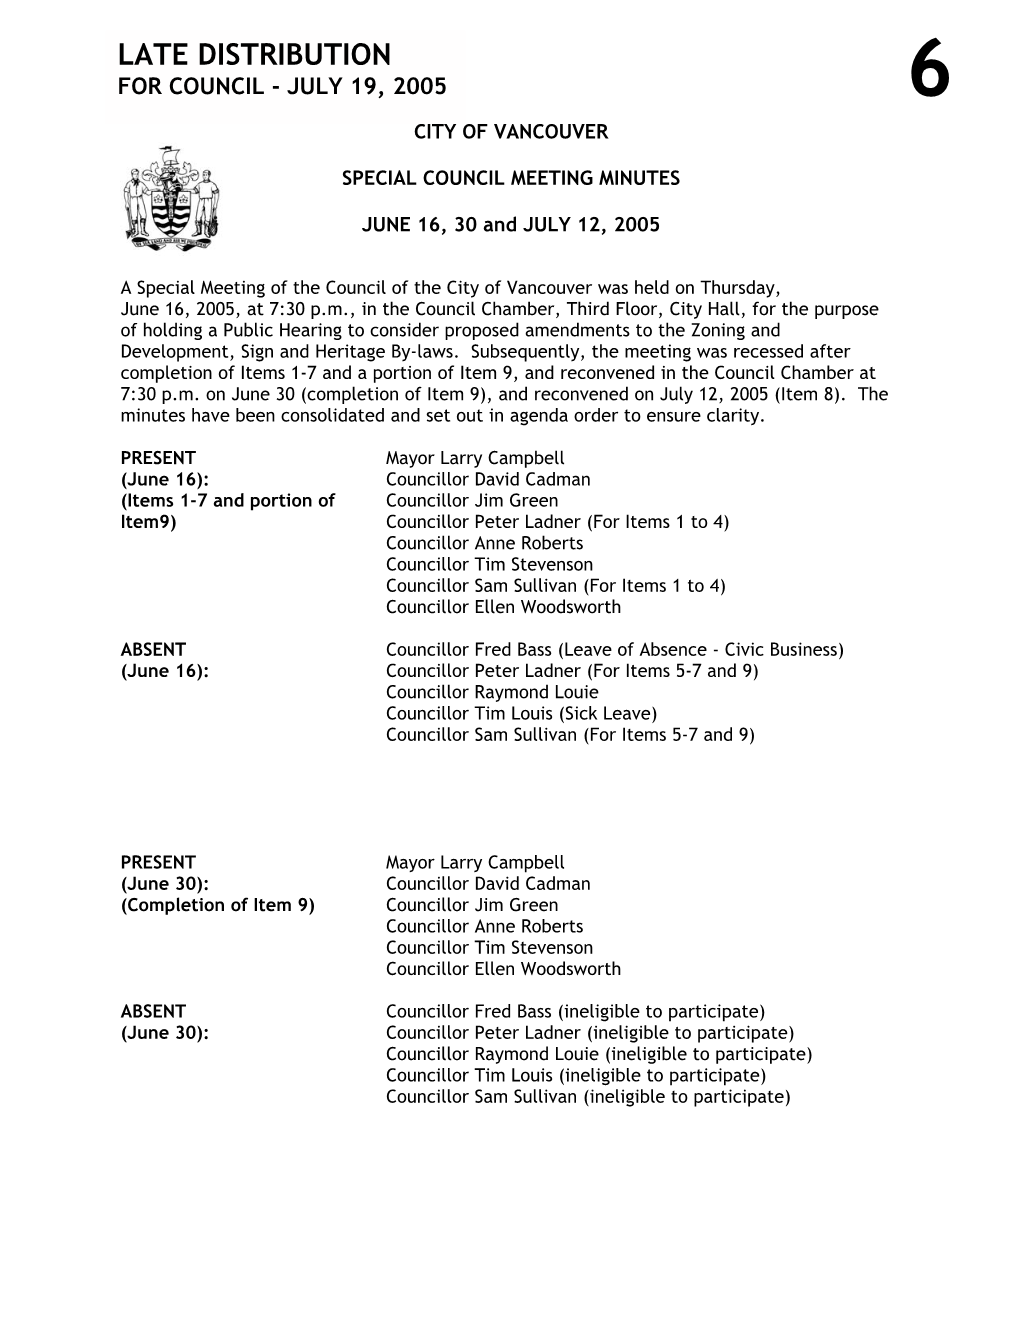 Public Hearing June 16, 30 and July 12, 2005